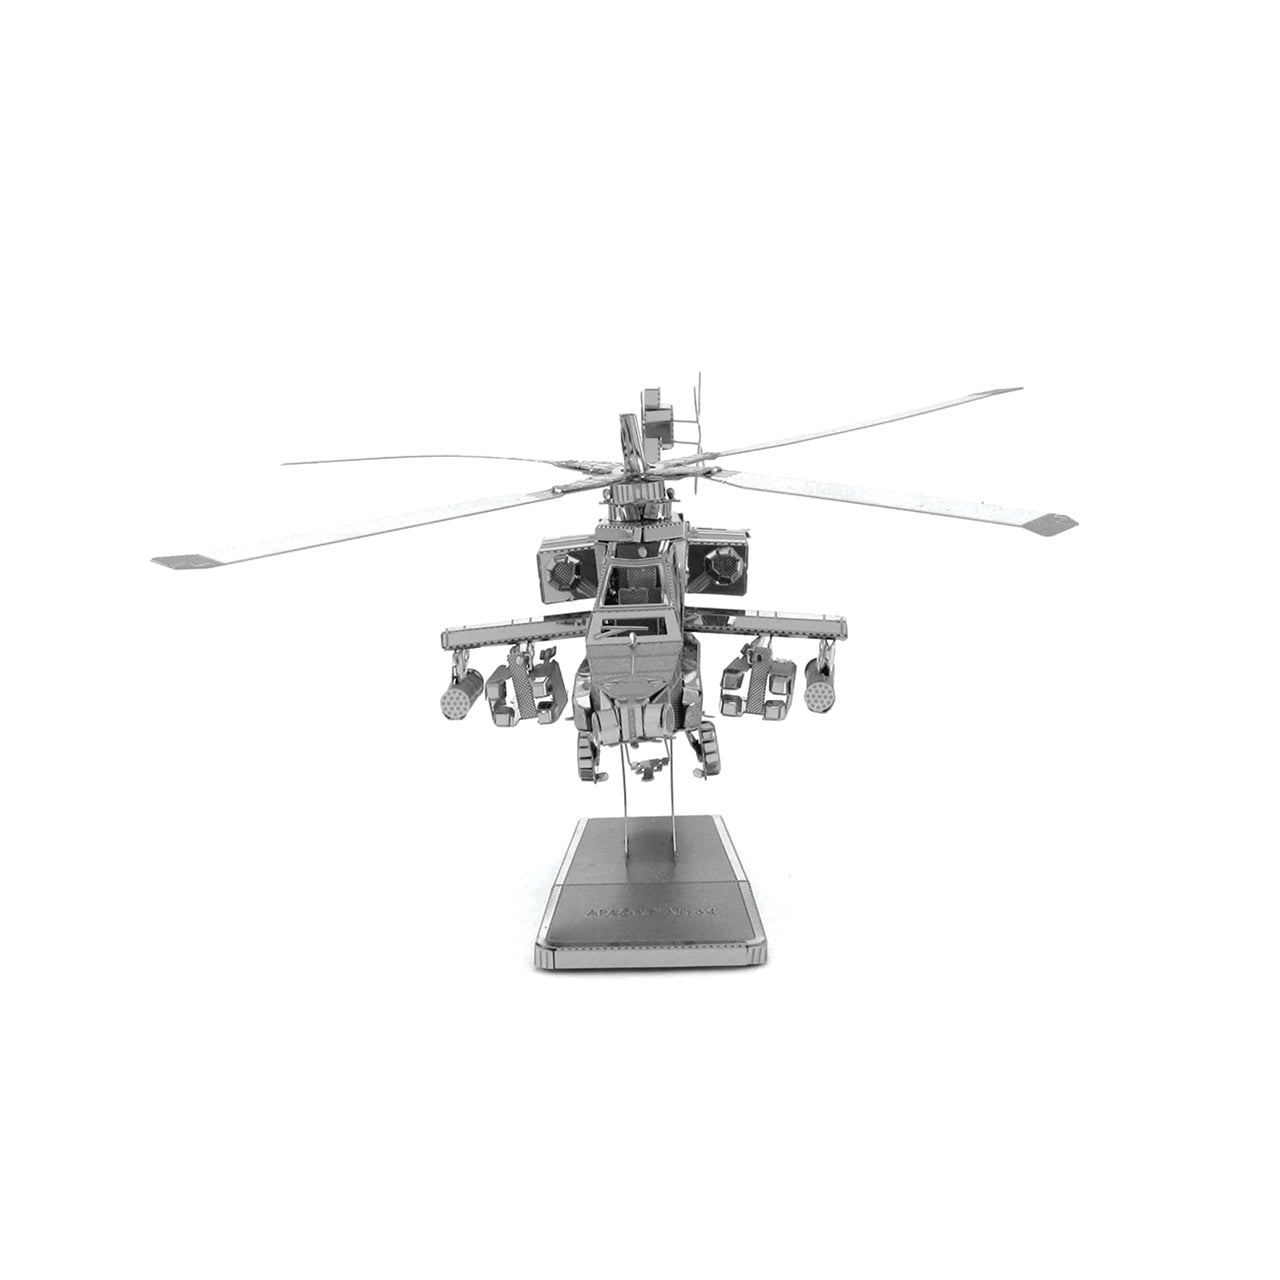 FMW083 Apache AH-64 Helicopter (Buildable) (Discontinued Model)